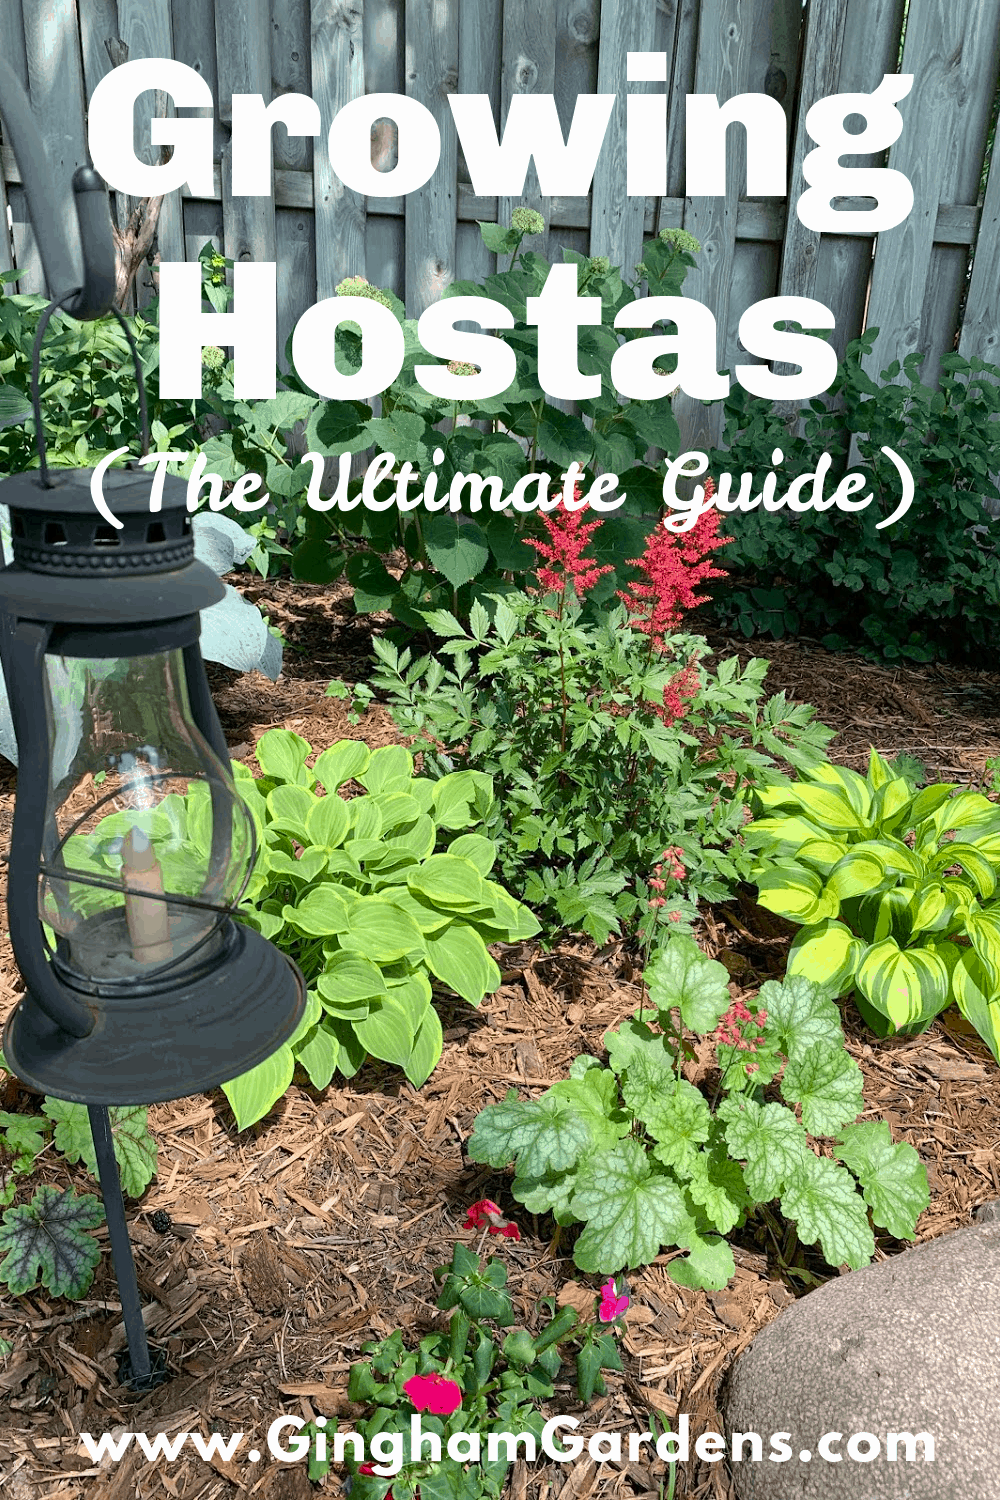 Image of a Hosta Garden with text overlay - Growing Hostas (The Ultimate Guide)